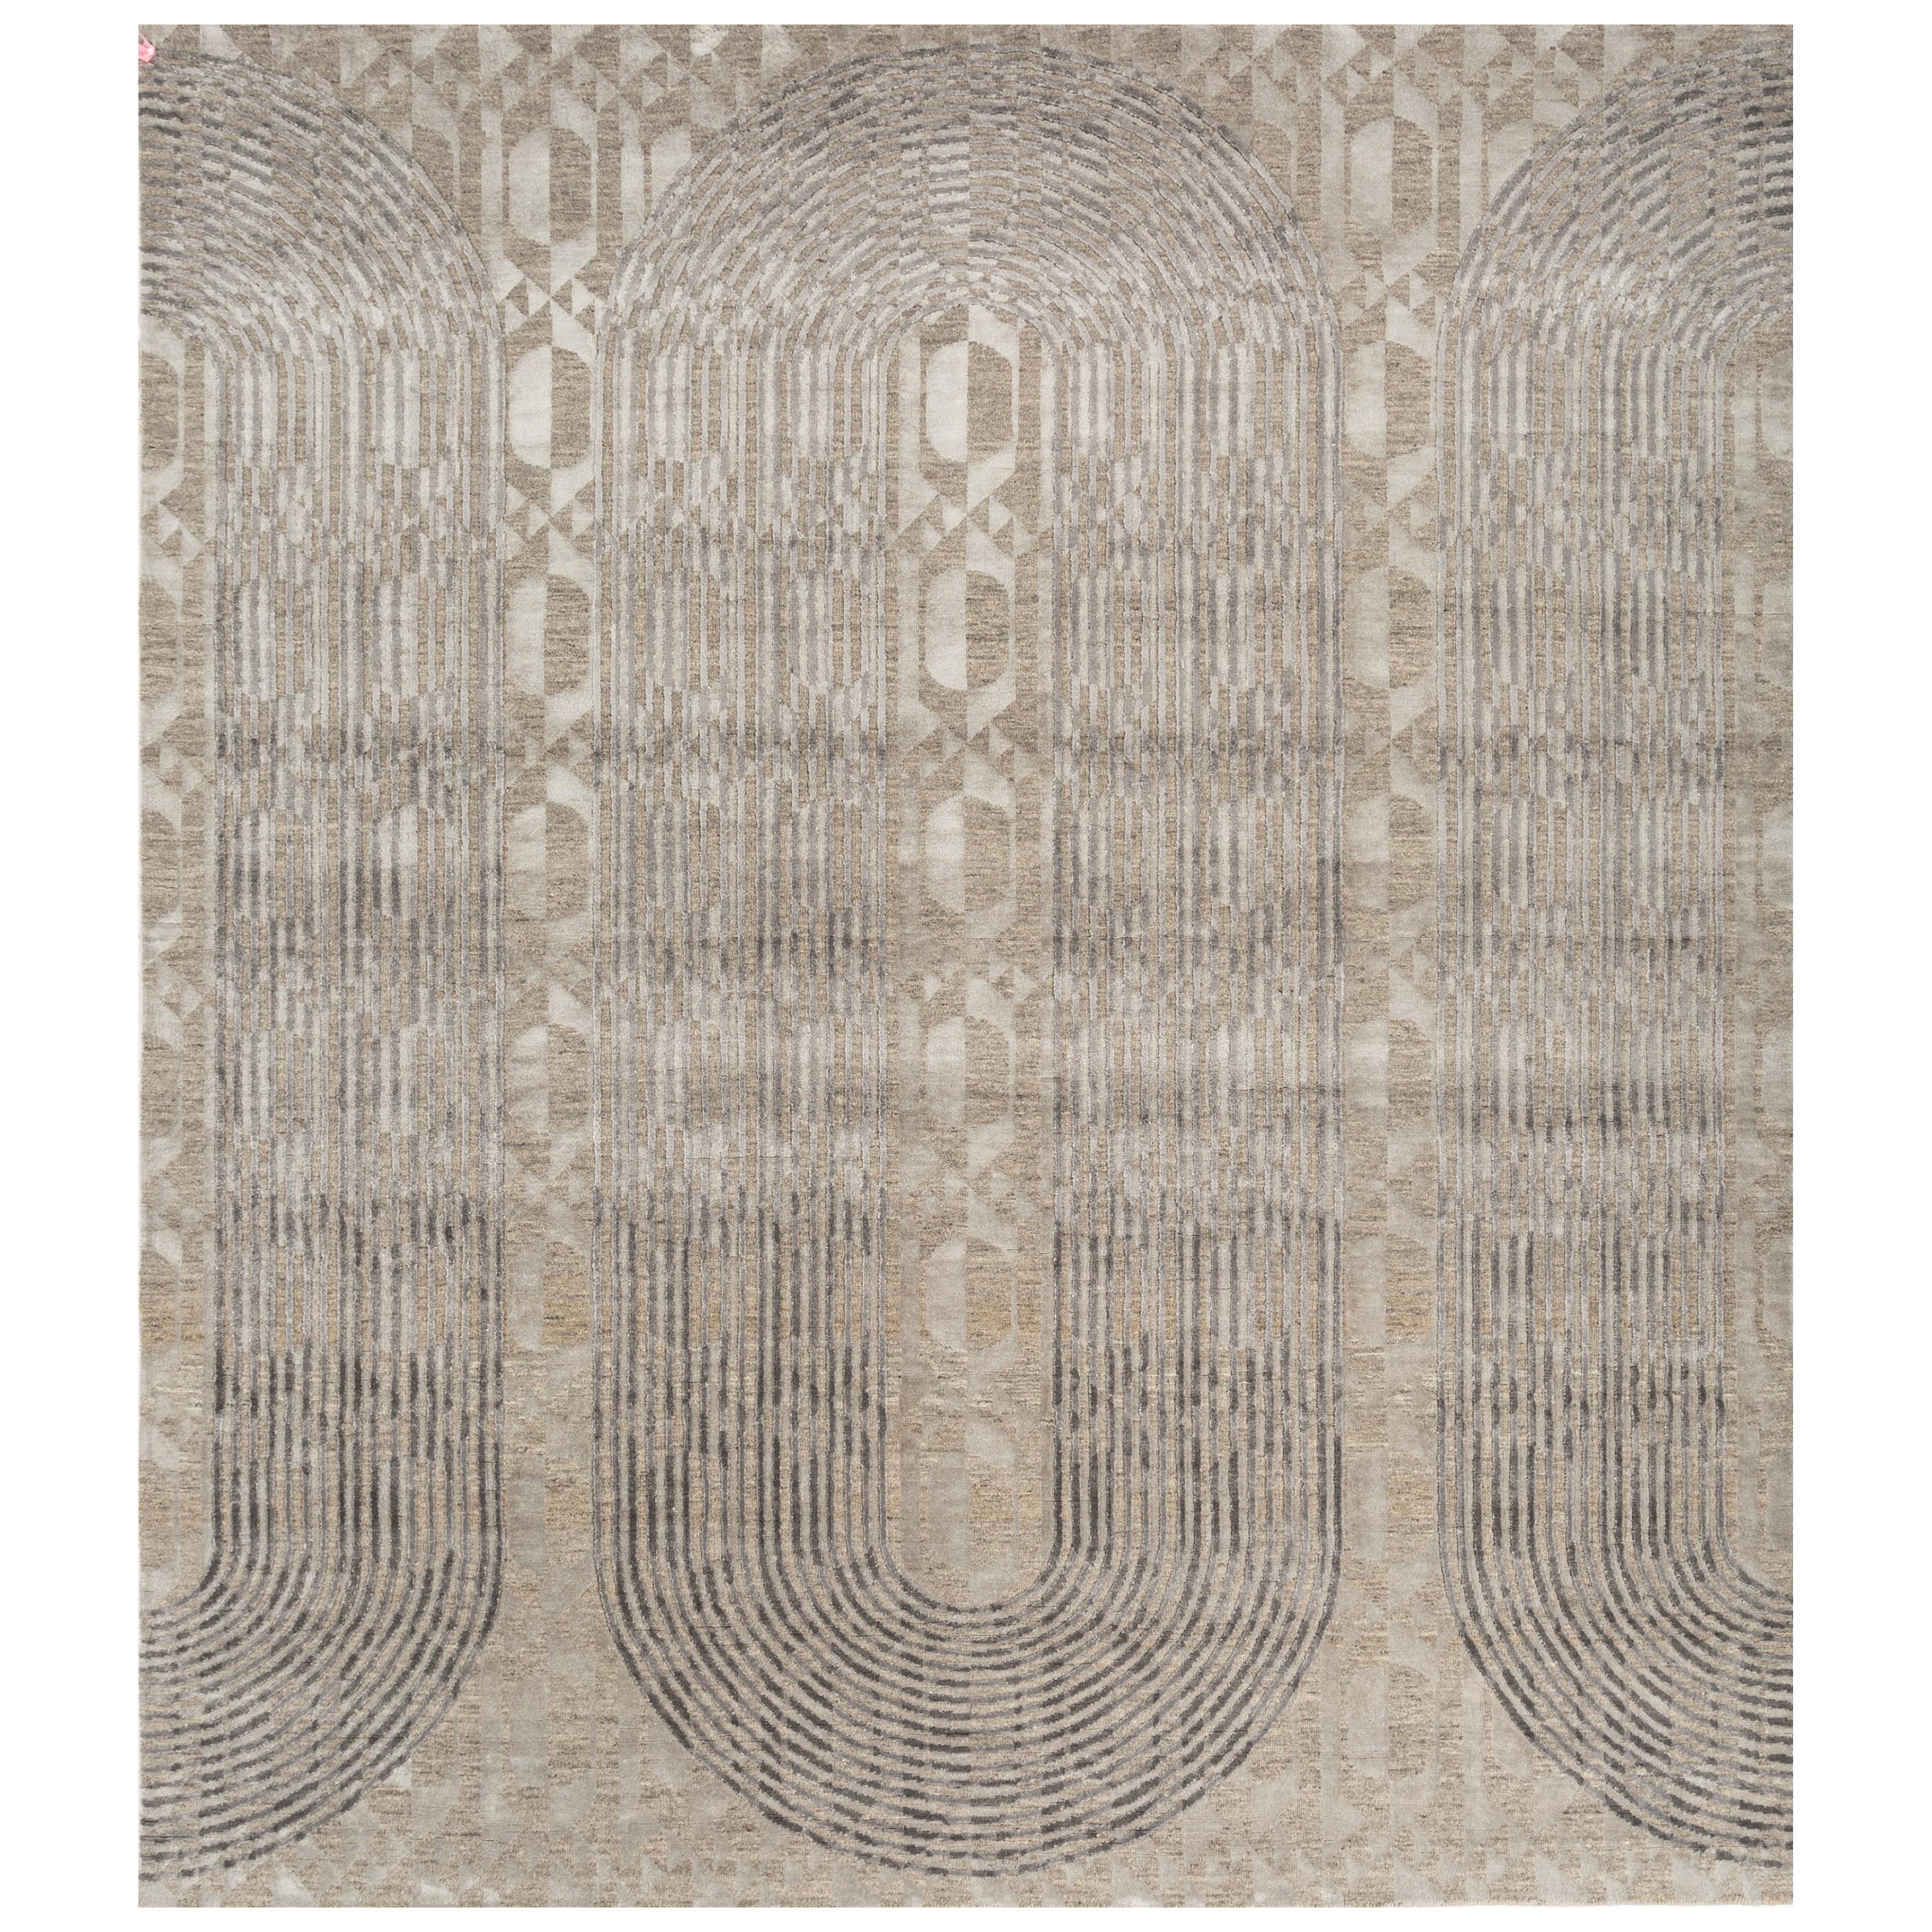 Urban elegance natural gray & liquorice 240X300 cm handknotted rug For Sale